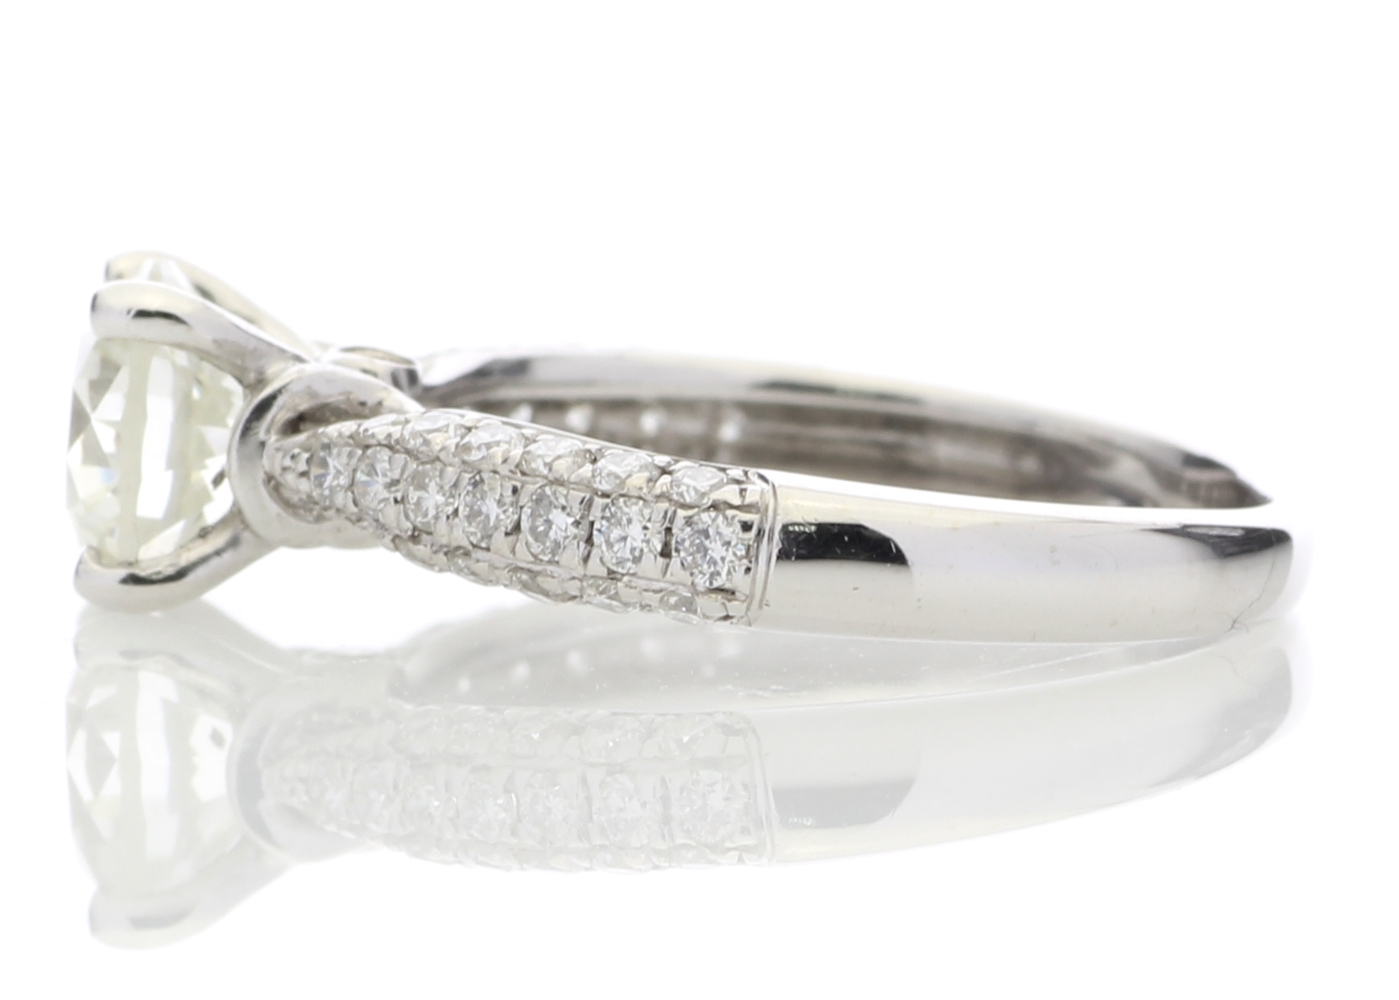 18ct White Gold Single Stone Diamond Ring With Stone Set Shoulders (1.00) 1.38 Carats - Image 3 of 5